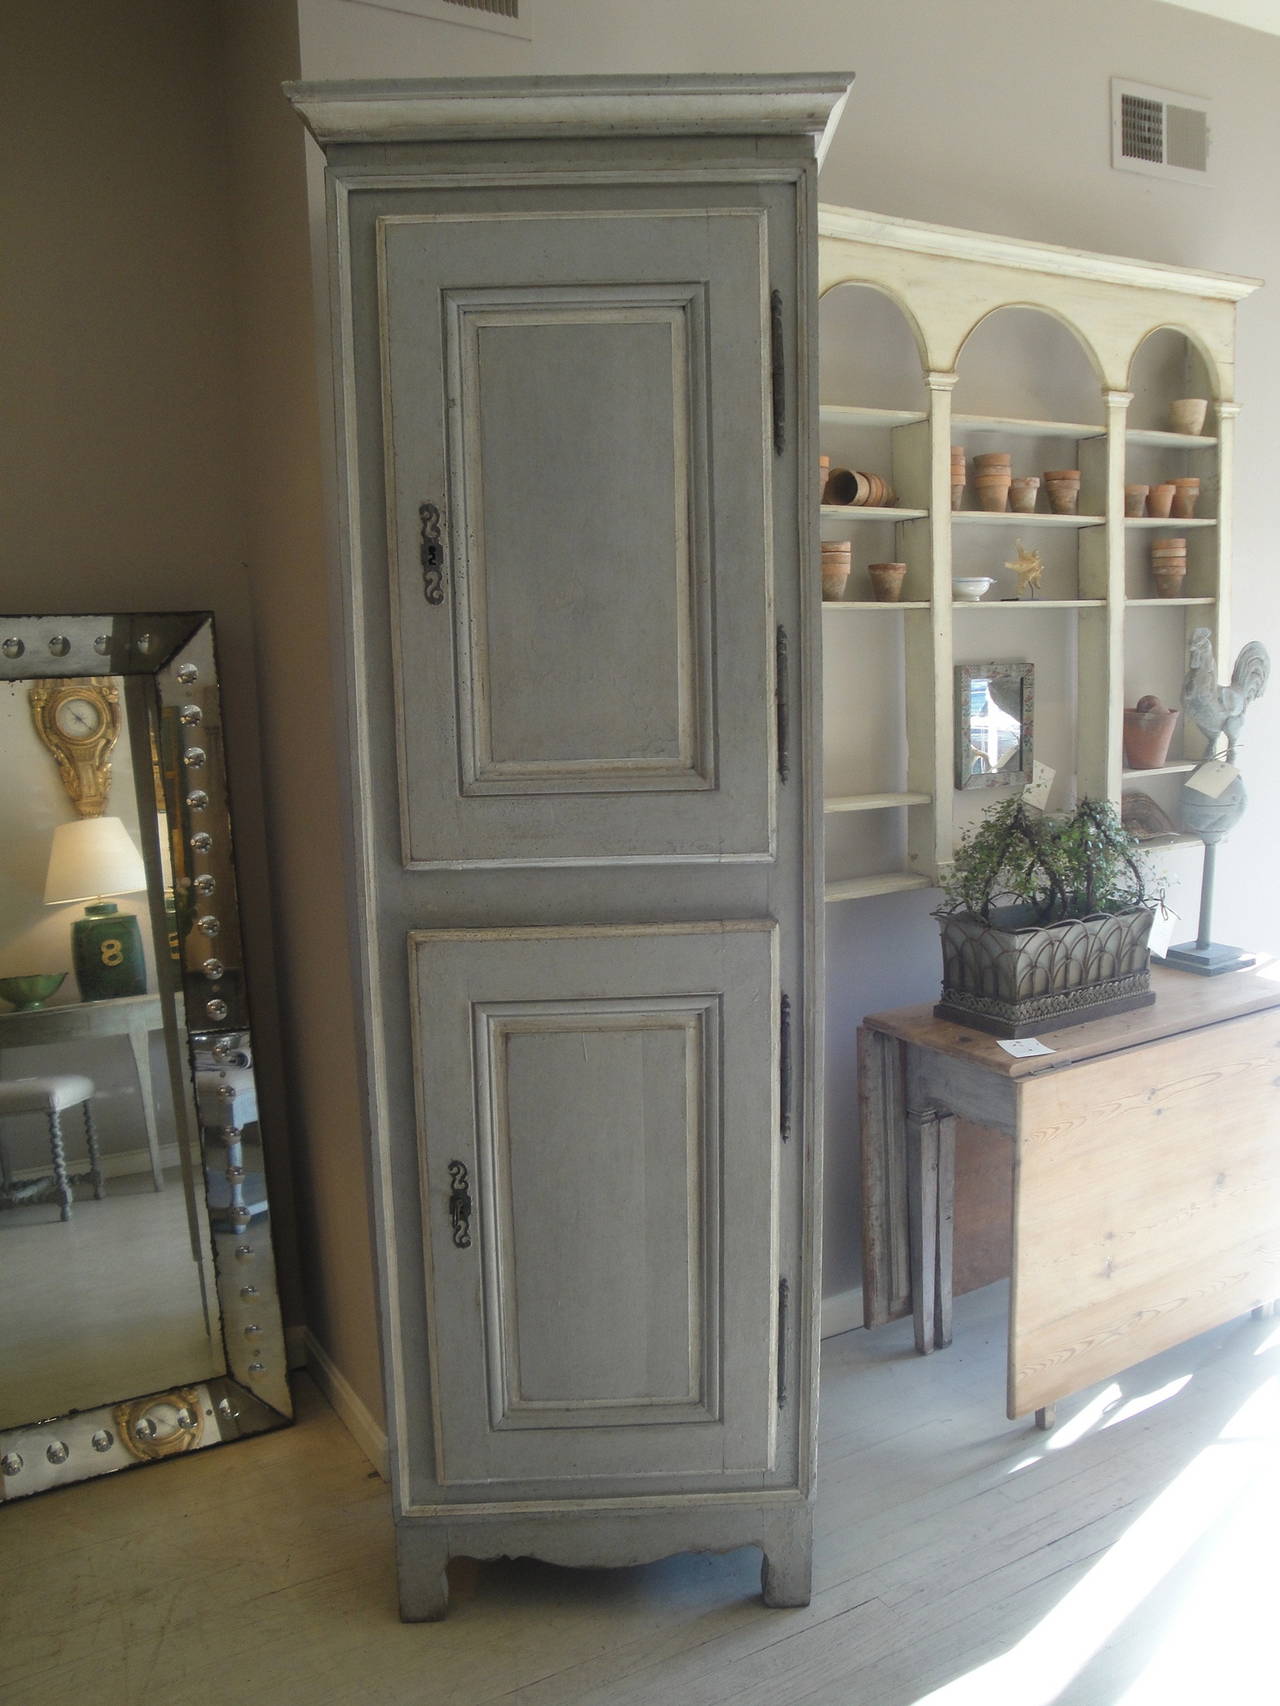 18th century French painted tall chimney cupboard with raised panel doors, shaped skirt and original hardware.